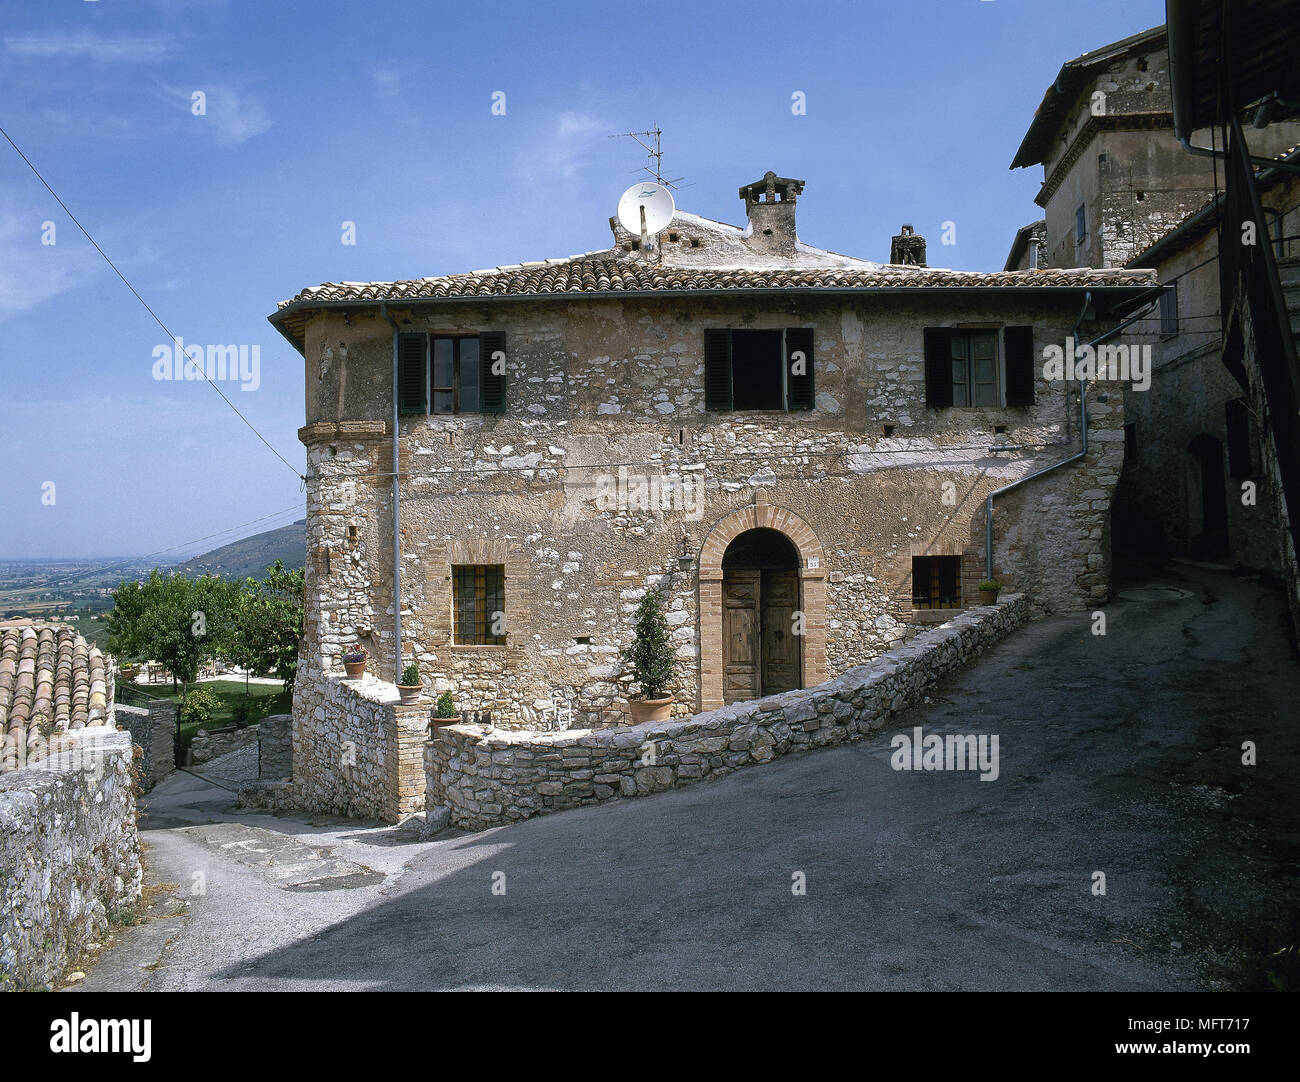 Exterior rustic stone villa ached doorway window shutters  Exteriors houses villas country Stock Photo